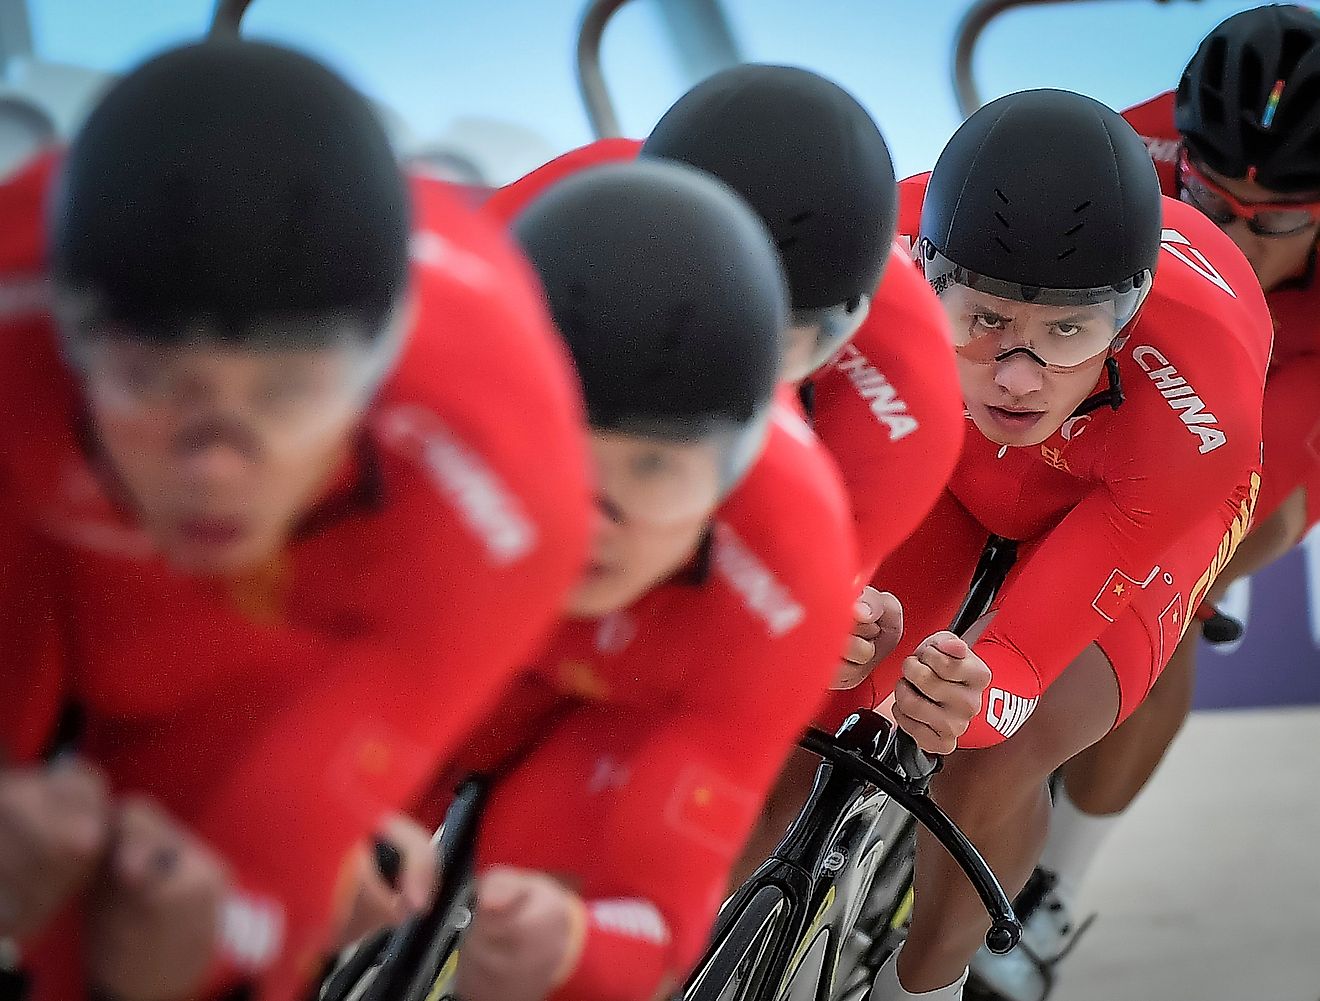 China cycling during an event at a cycling track competition.